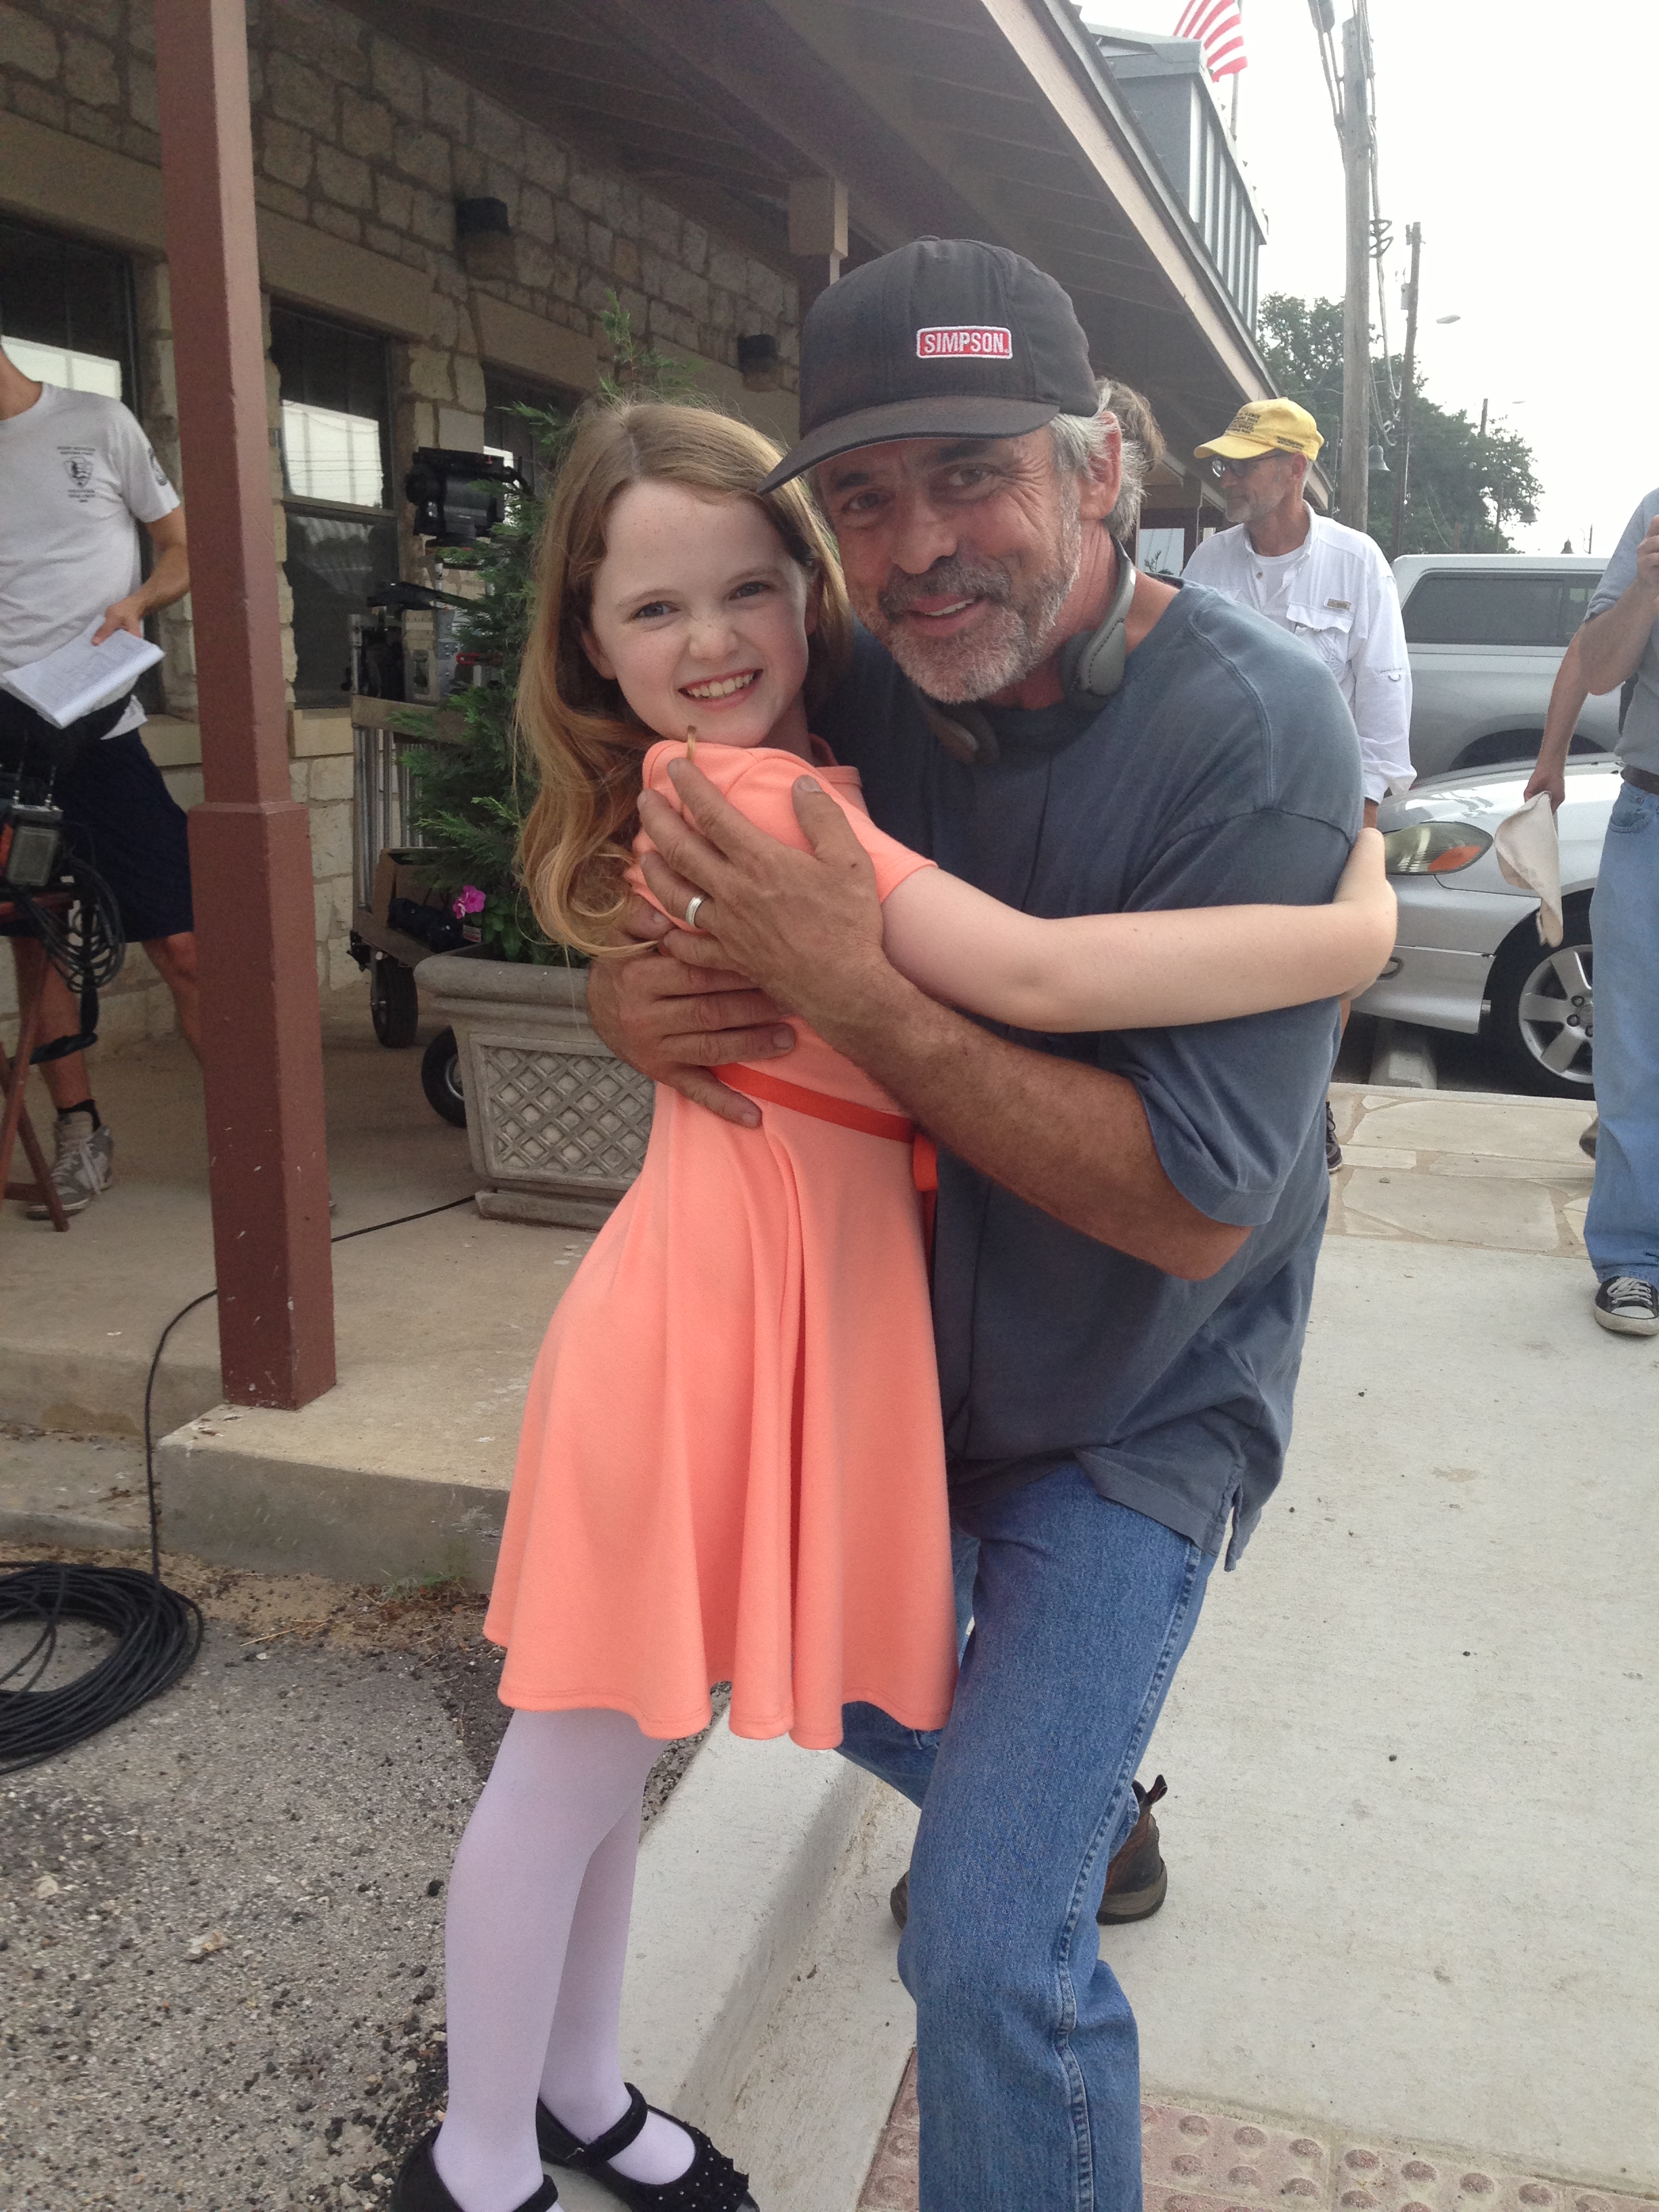 Teagan with writer/director Jeff Schwan on the set of 'BOOTh'.